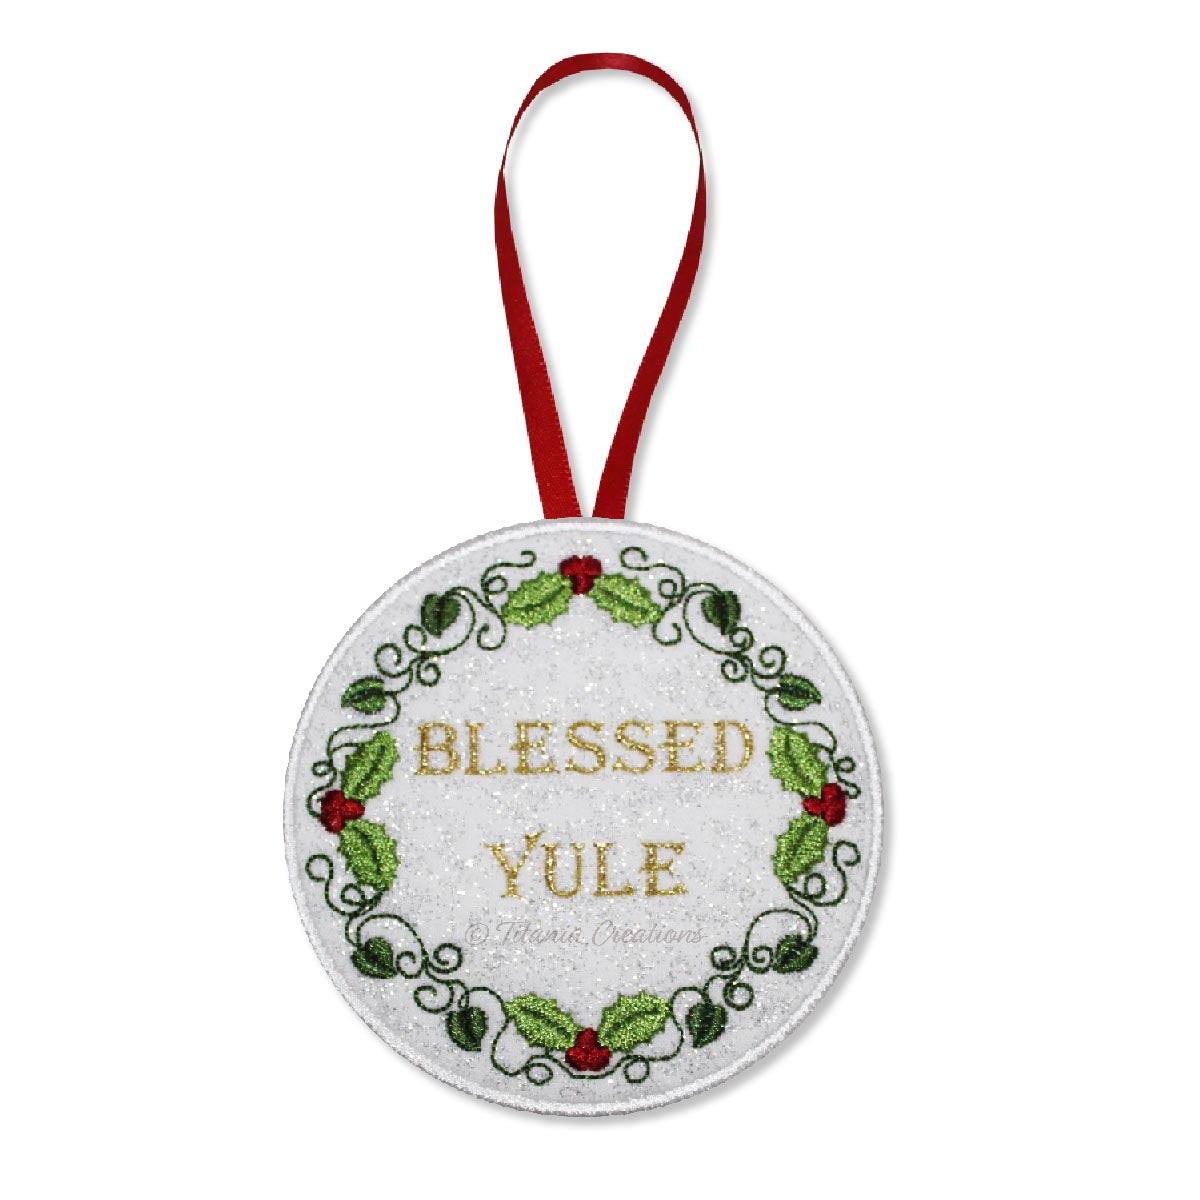 ITH Blessed Yule Hanger 4x4